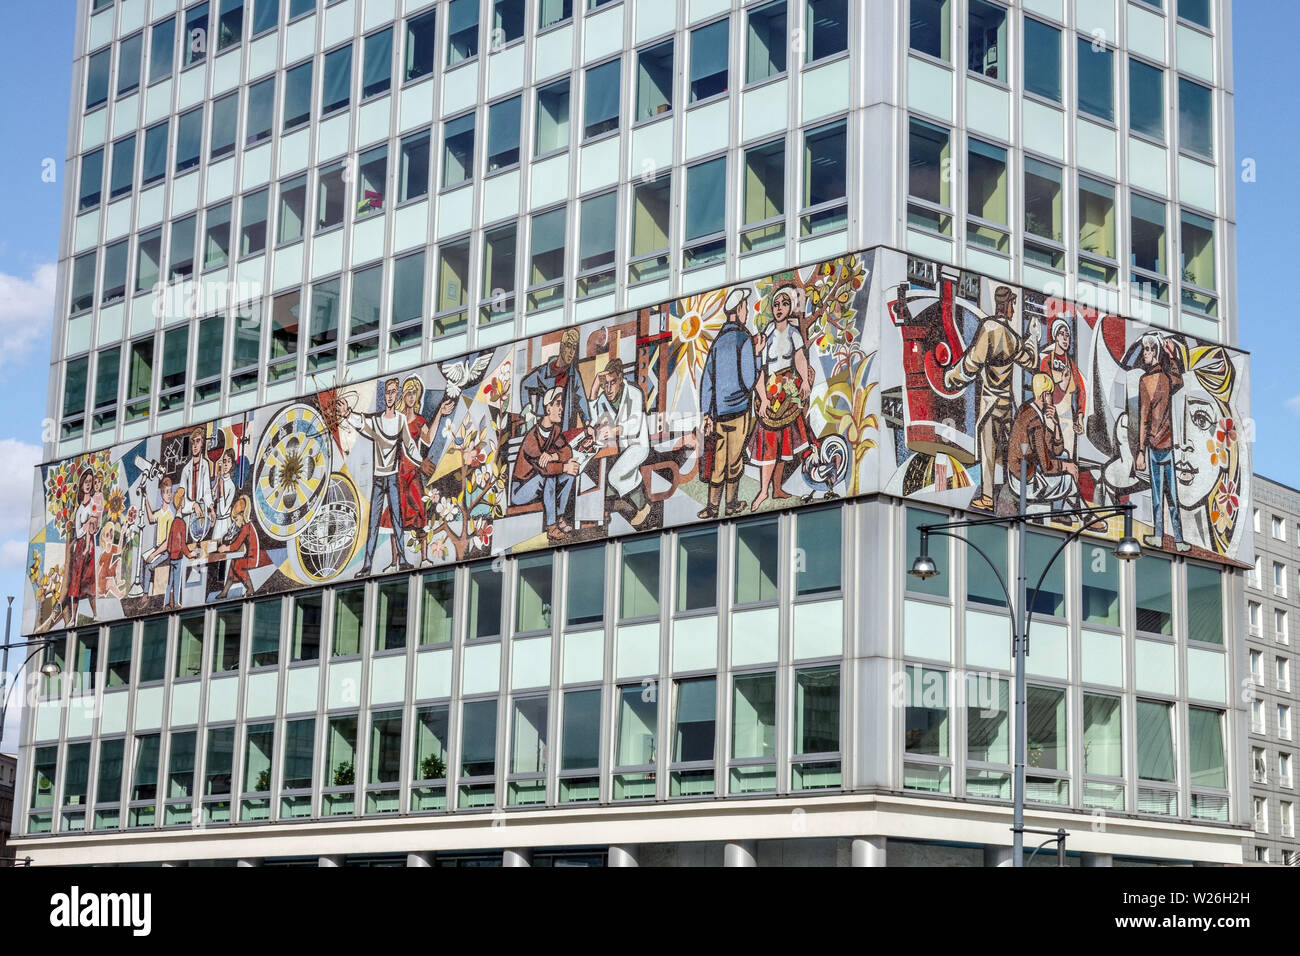 Mosaic of socialist realism on a building from the 1960s, Haus des Lehrers, Mitte, Berlin, Germany Stock Photo